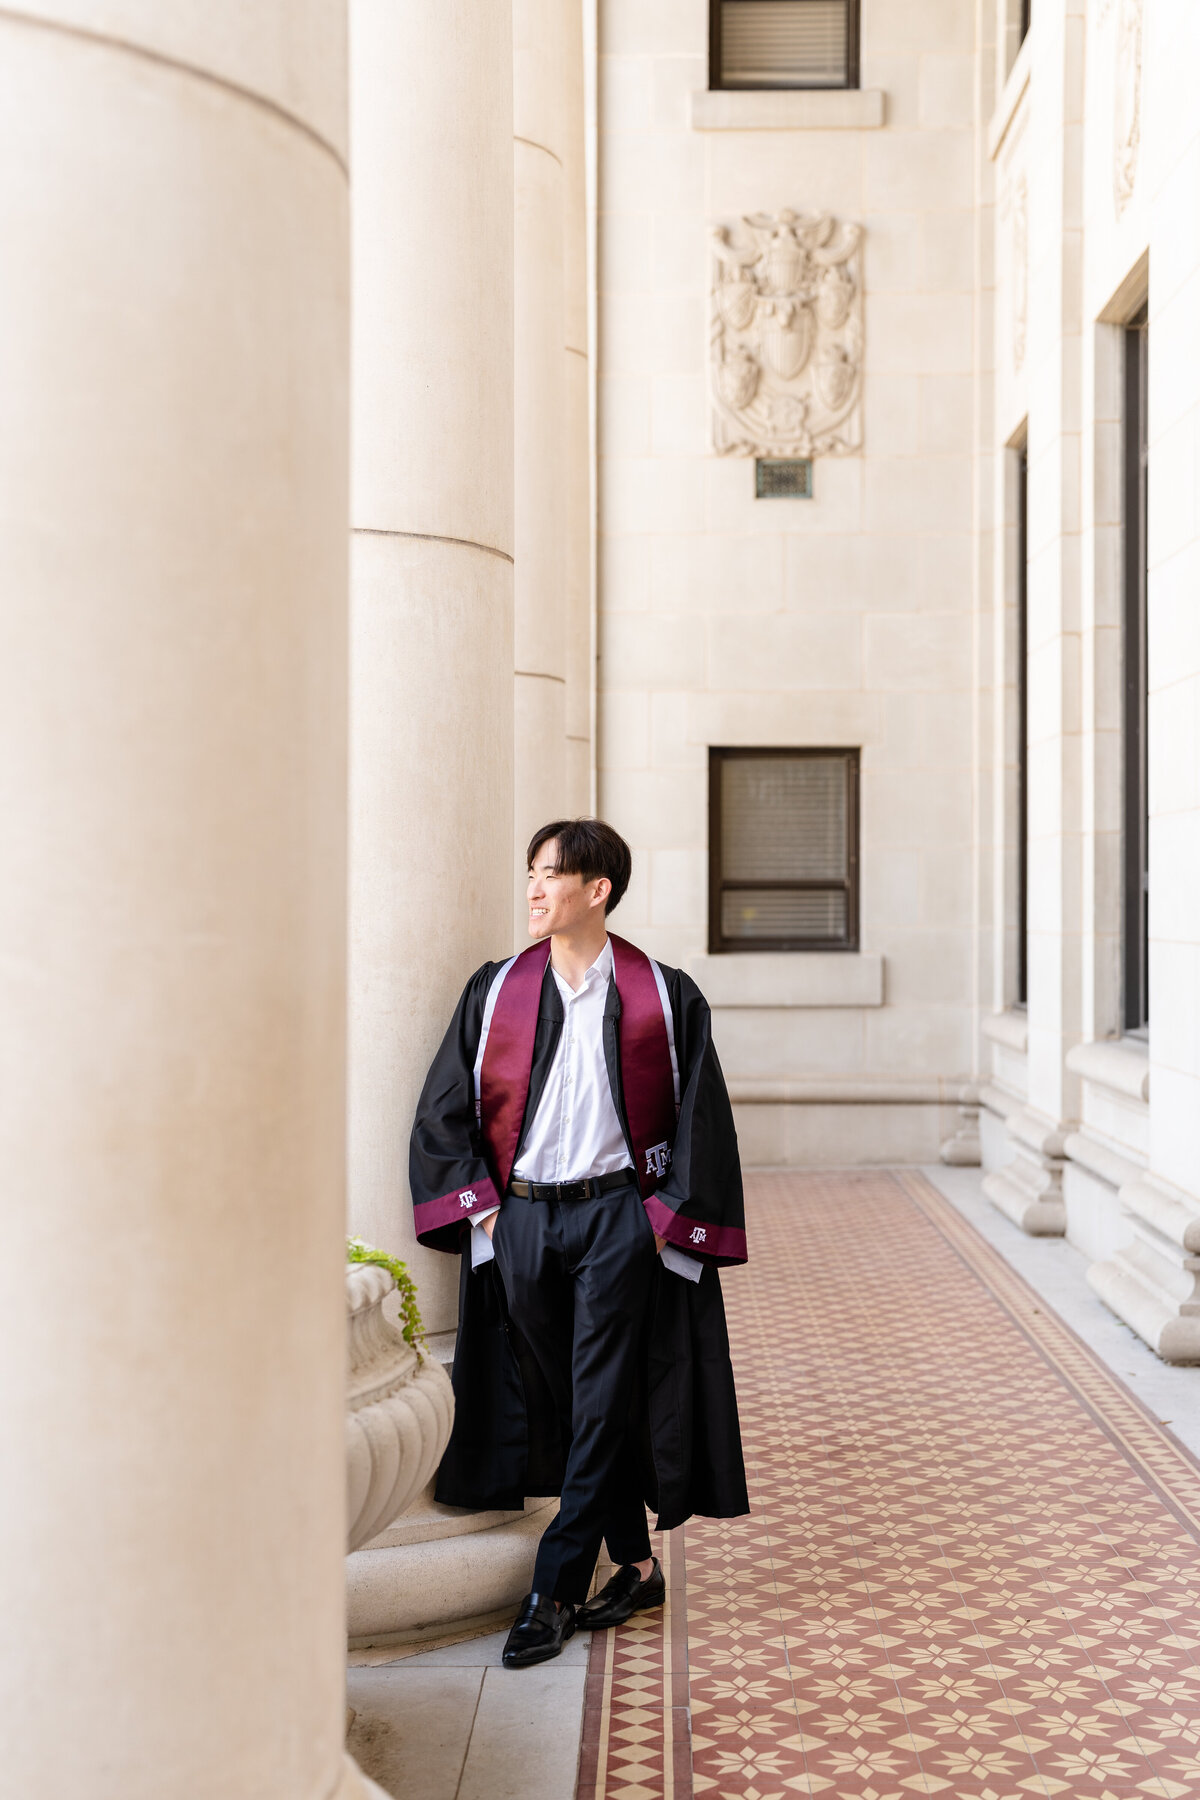 Texas A&M senior guy wearing gown and Aggie stole and looking away while leaning against column at Administration Building